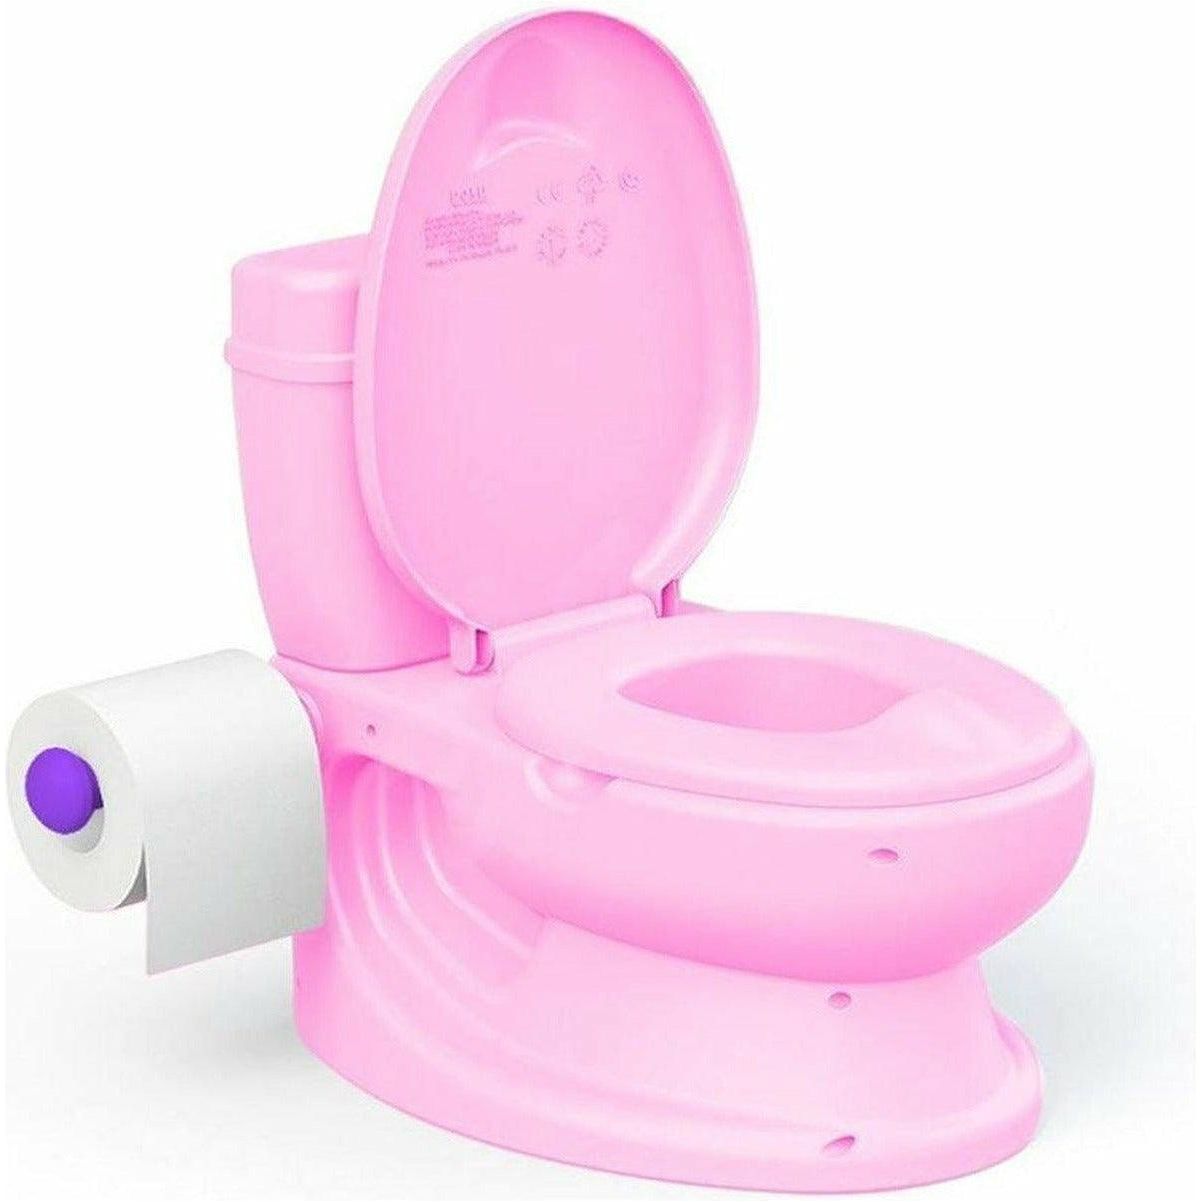 Dolu 7252 Educational Potty - Pink - BumbleToys - 2-4 Years, Cecil, Girls, Potties, Potty, Pre-Order